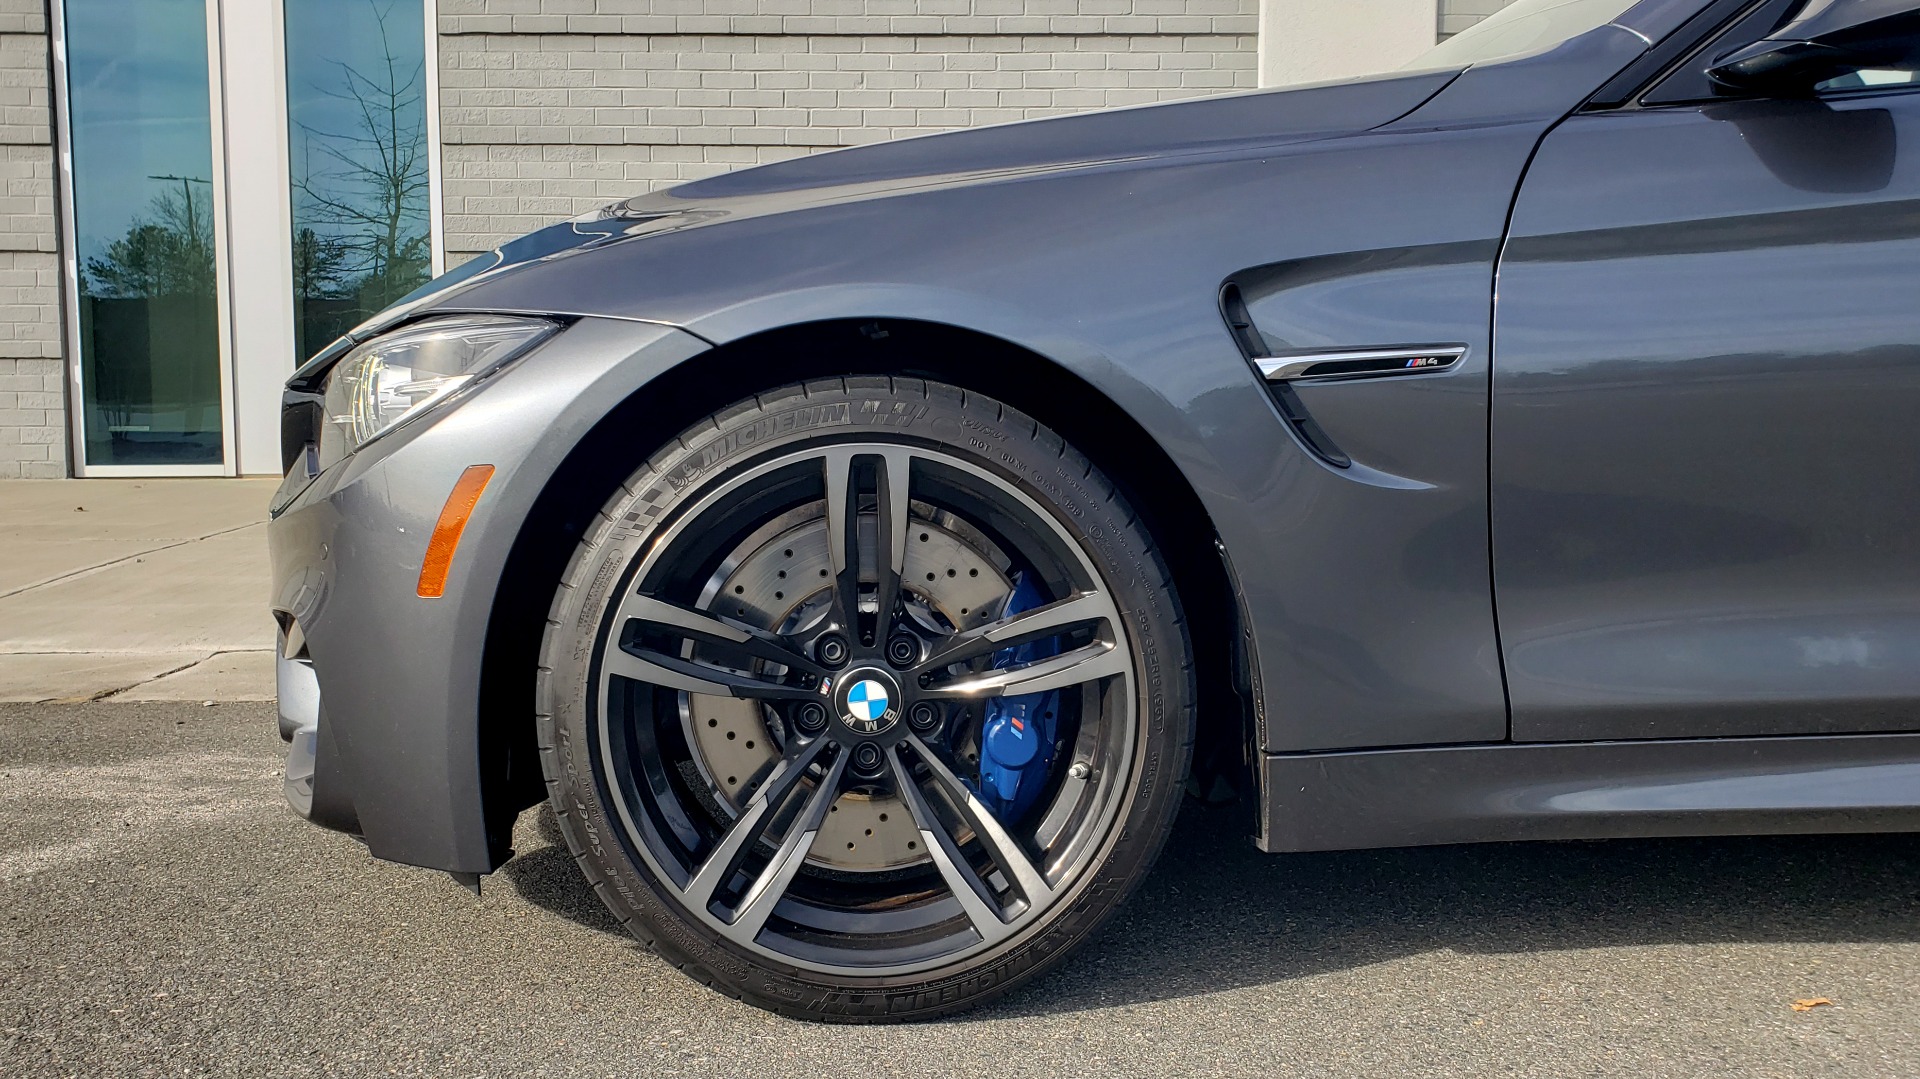 Used 2019 BMW M4 COUPE 3.0L 425HP / 7-SPD AUTO / NAV / 19-IN WHEELS / REARVIEW for sale $67,999 at Formula Imports in Charlotte NC 28227 83